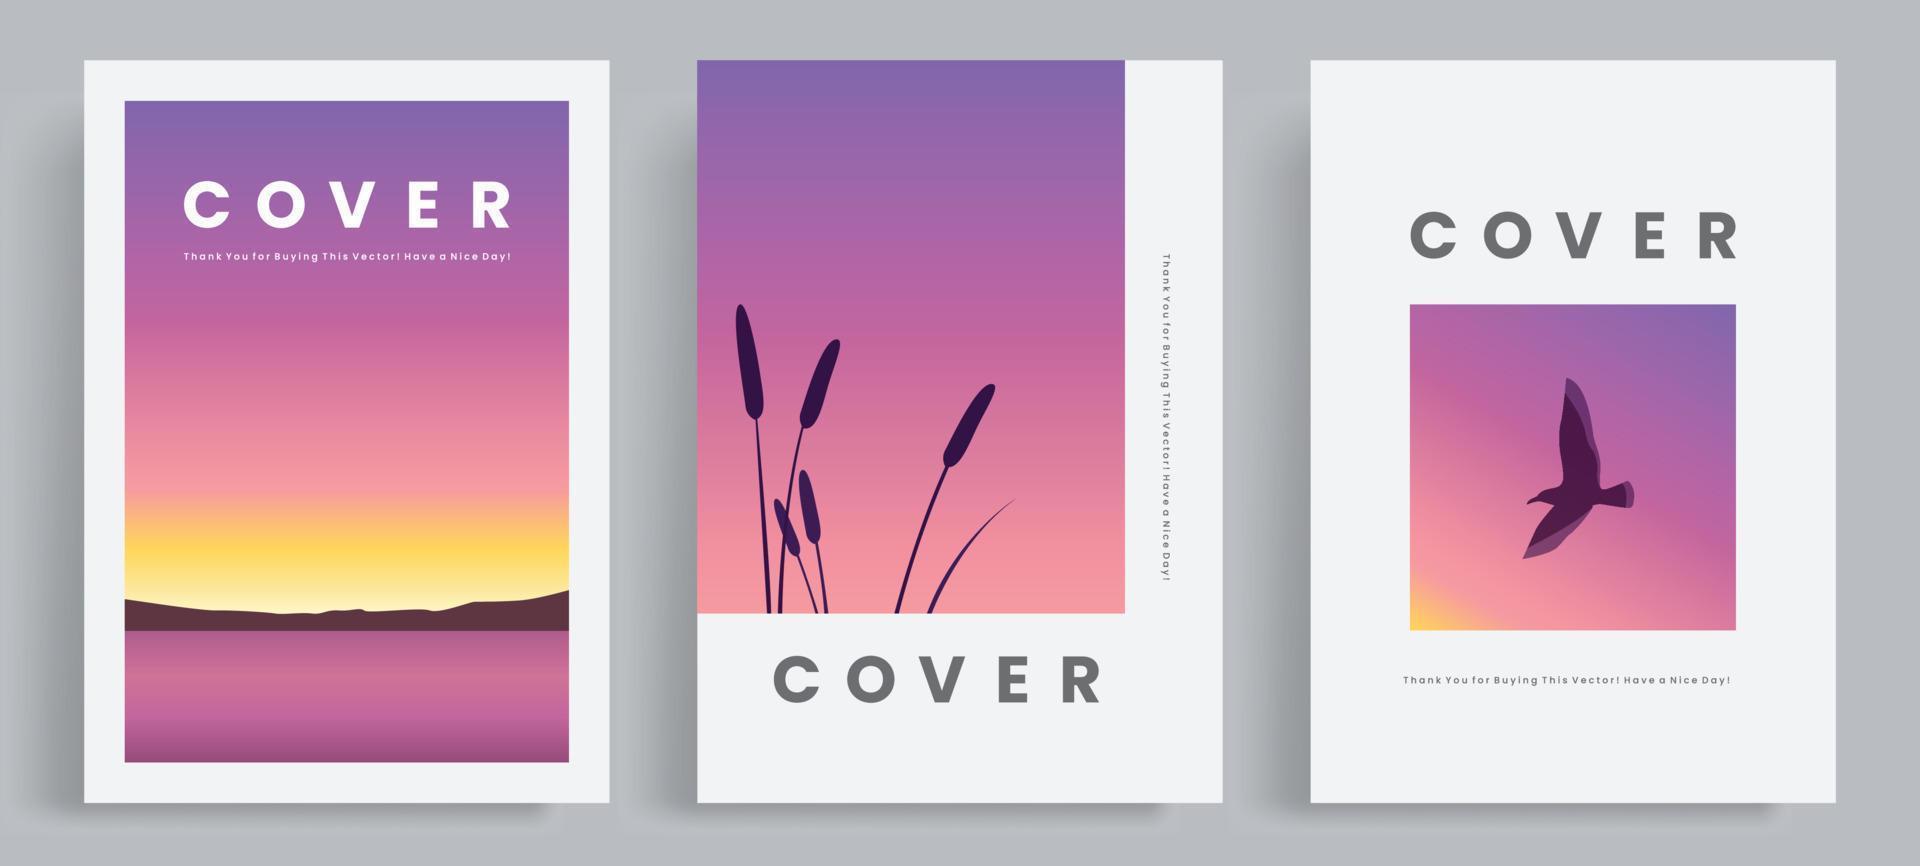 Minimalist nature theme books cover template collection. With sunset vector illustrations of lakes, mountains, and silhouettes of cattails and bird.